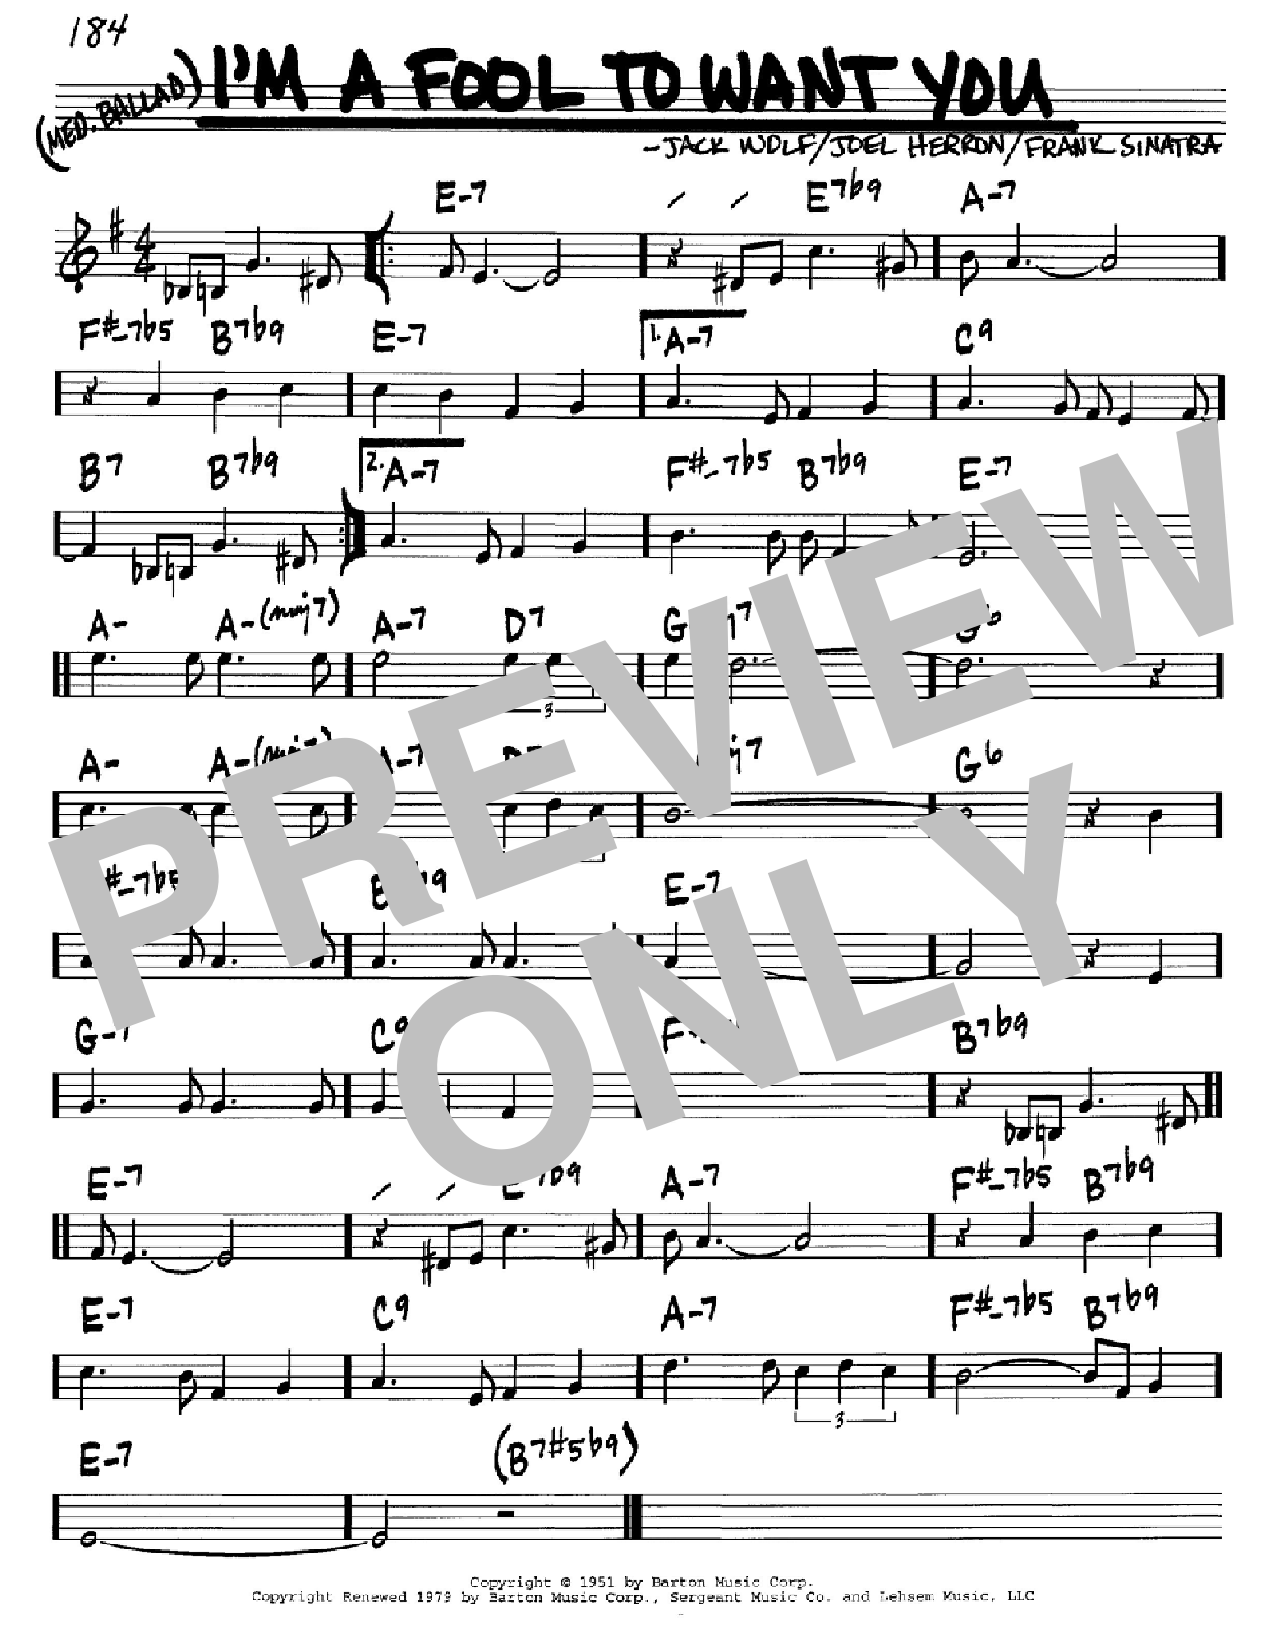 Download Frank Sinatra I'm A Fool To Want You Sheet Music